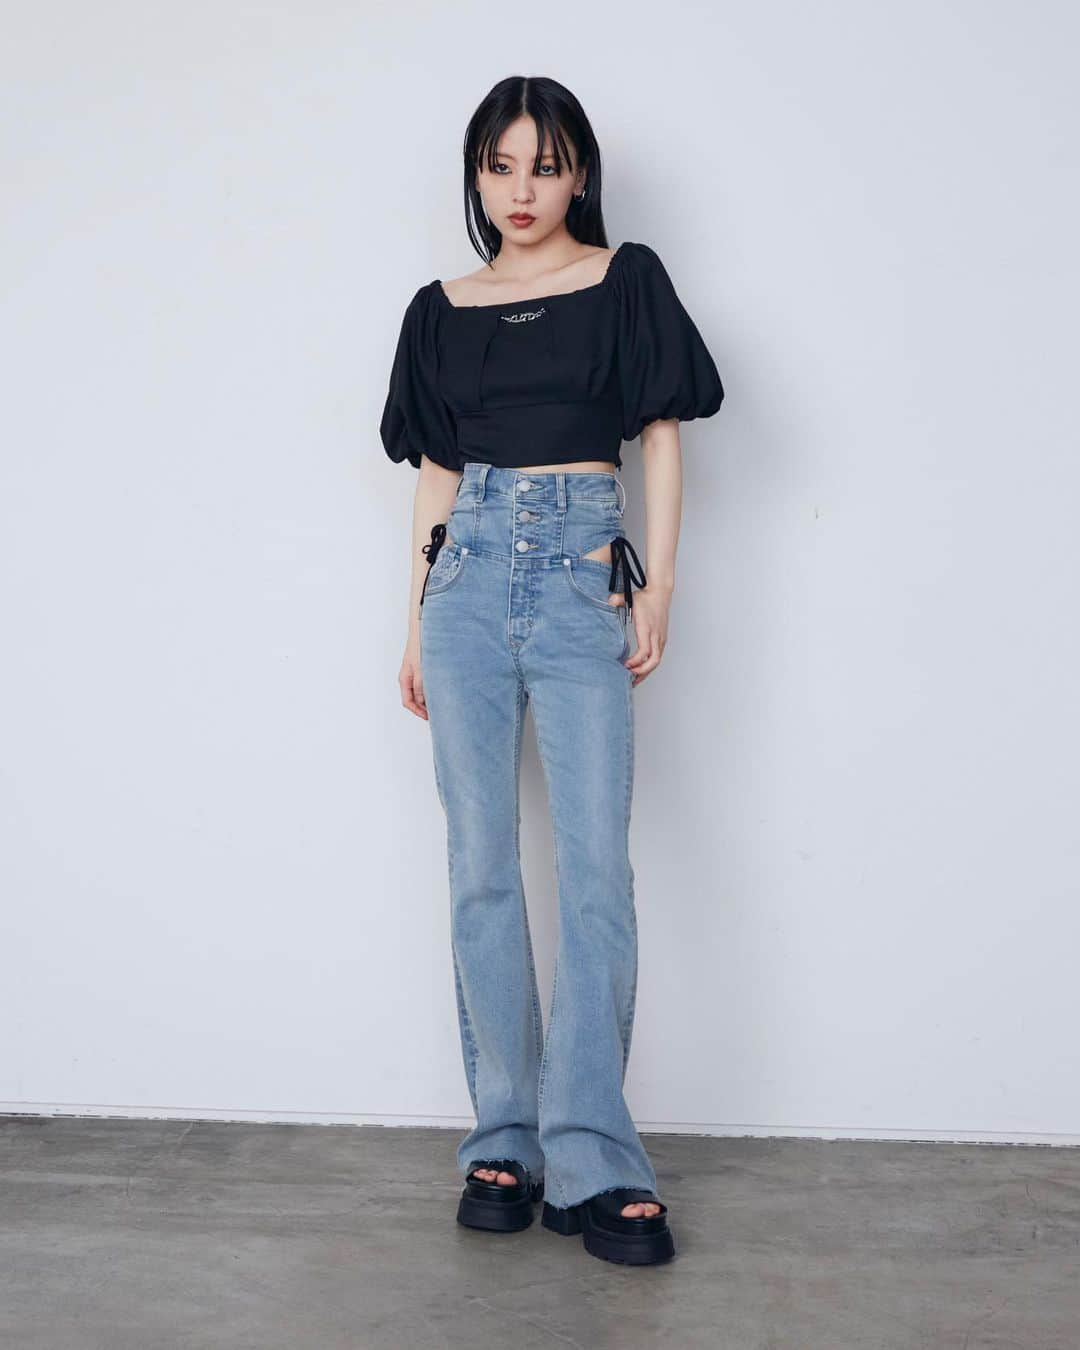 EMODAさんのインスタグラム写真 - (EMODAInstagram)「ㅤㅤㅤ July recommend item ㅤㅤㅤ ㅤㅤㅤㅤㅤㅤ ・FIT CROSS BAND TOP ￥ 5,940 tax'in ・SIDE STRING H/W PAGGINS ￥ 14,080 tax'in ・TANK RUBBER SANDAL ￥ 14,080 tax'in  ・CROSS E CHARM TOP ￥ 6,930 tax'in ＿＿＿＿＿＿＿＿＿＿＿＿＿＿＿＿＿＿＿＿＿＿＿＿ "FINAL SALE" 7/13(thu)12:00～7/17(mon)23:59  MAX60%OFF SALE!!!!  お得に夏物GET出来る最後のチャンス！ お見逃しなく☆彡 ＿＿＿＿＿＿＿＿＿＿＿＿＿＿＿＿＿＿＿＿＿＿＿＿ㅤ  詳細は( @emoda_official )のTOPのURL,storiesチェック✔️ ㅤㅤㅤ ㅤㅤㅤ ㅤㅤㅤ ㅤㅤㅤ ㅤㅤㅤㅤㅤㅤㅤㅤ #EMODA #EMODA_JEANS #EMODA_SHOES #ハイウエストデニム #タンクサンダル #クロップド丈 #デニムコーデ #RUNWAYchannel @emoda_snap」7月15日 18時03分 - emoda_official